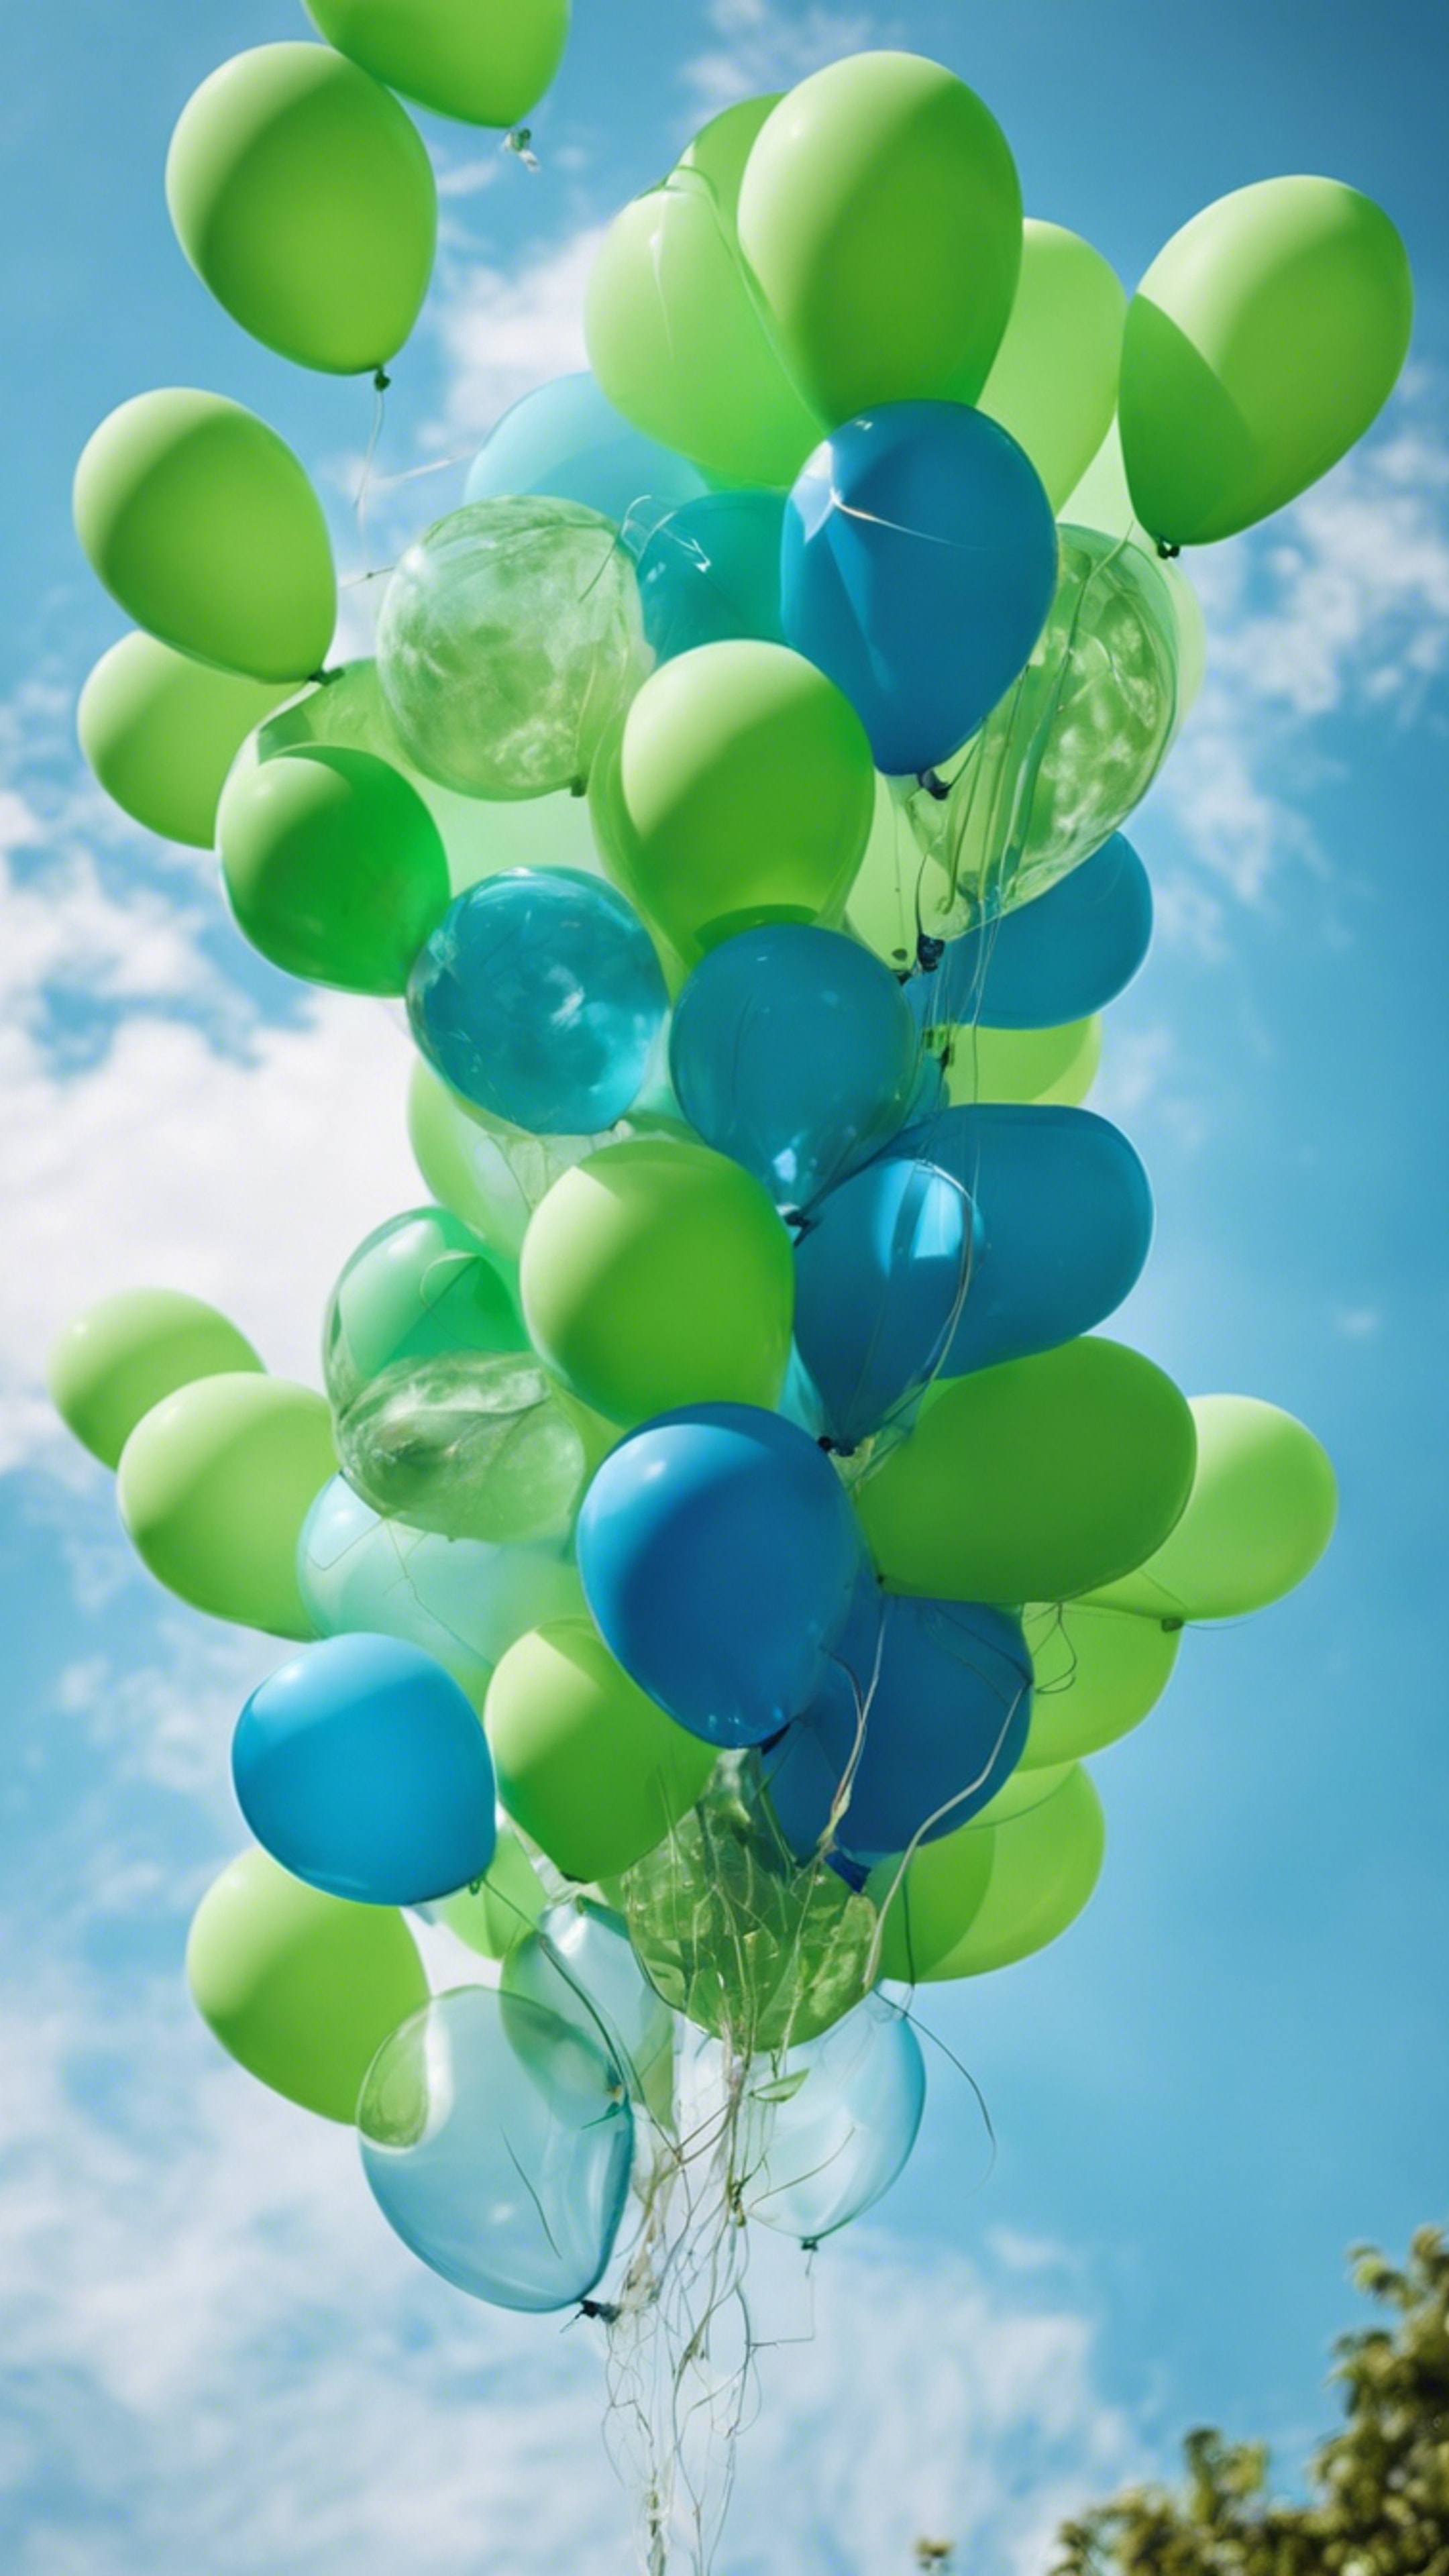 An array of blue and green balloons floating in a clear sky during the day. Papel de parede[0f6c85f120014fa1a128]